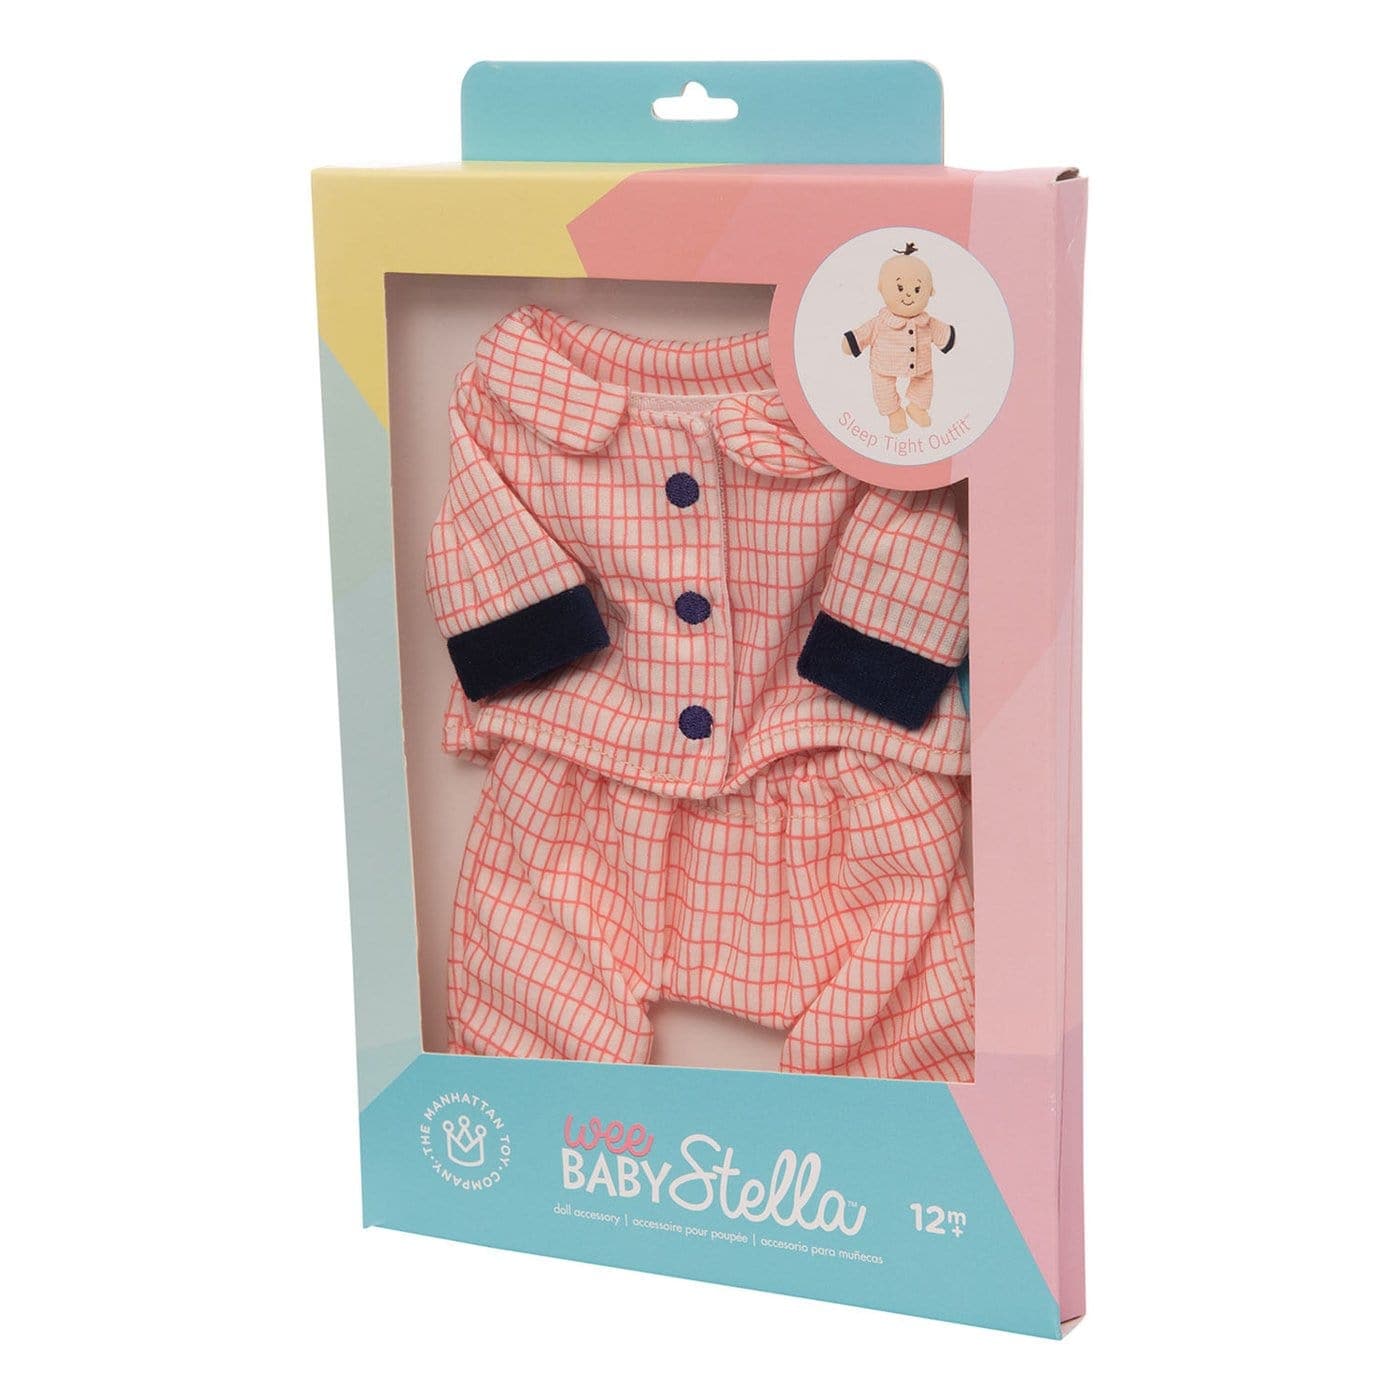 Manhattan Toy-Wee Baby Stella Sleep Tight Outfit-159810-XS For Doll-Legacy Toys